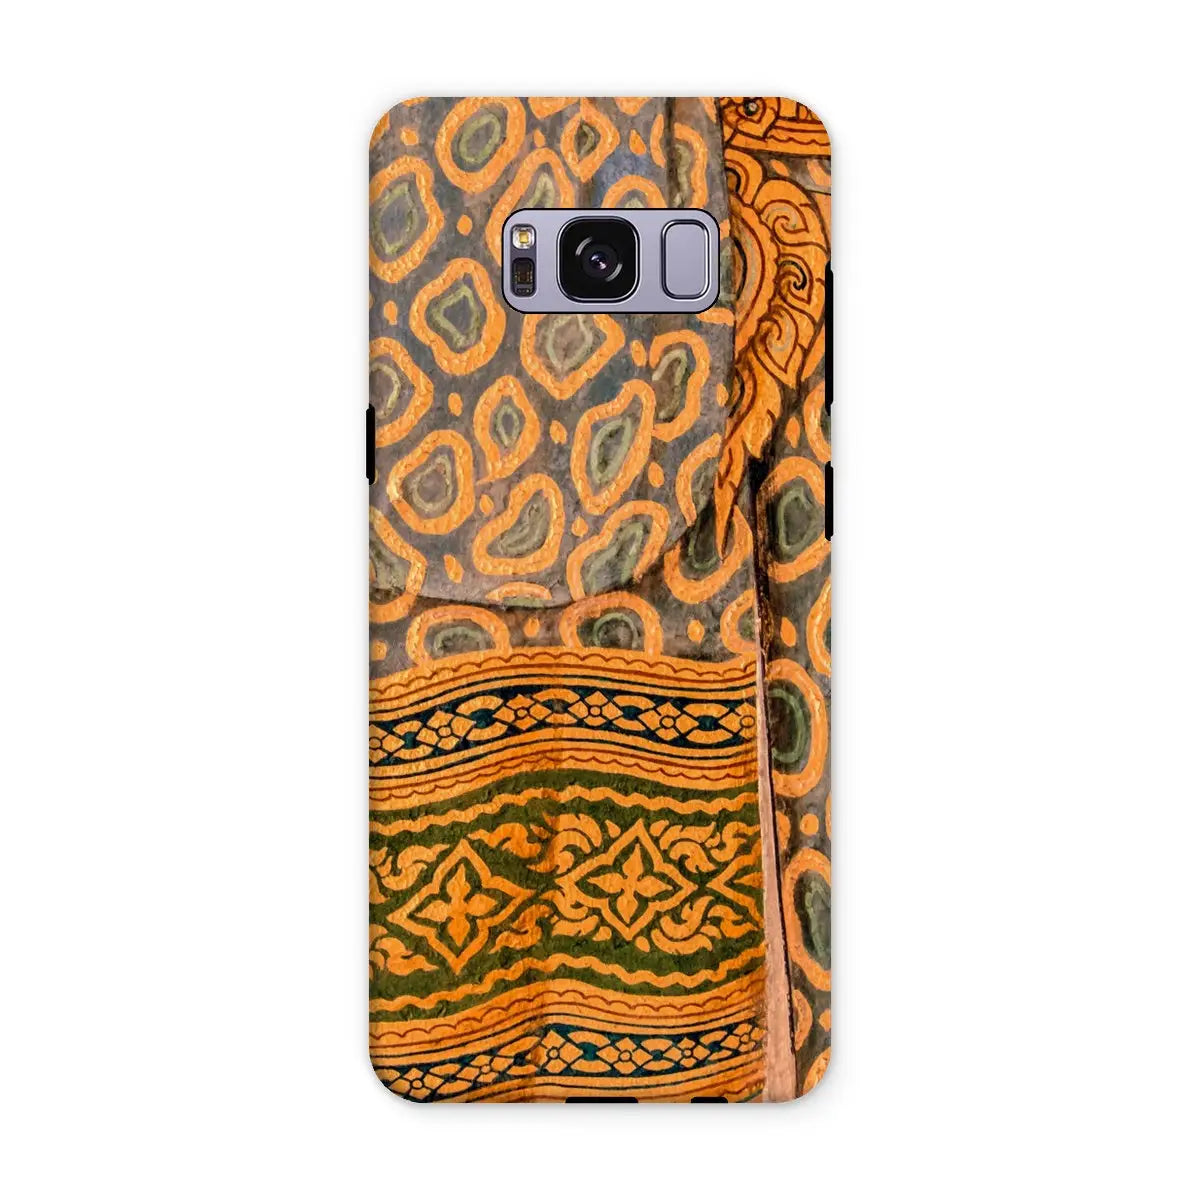 Lady In Waiting - Royal Siam Mural Art Phone Case - Samsung Galaxy S8 Plus / Matte - Mobile Phone Cases - Aesthetic Art